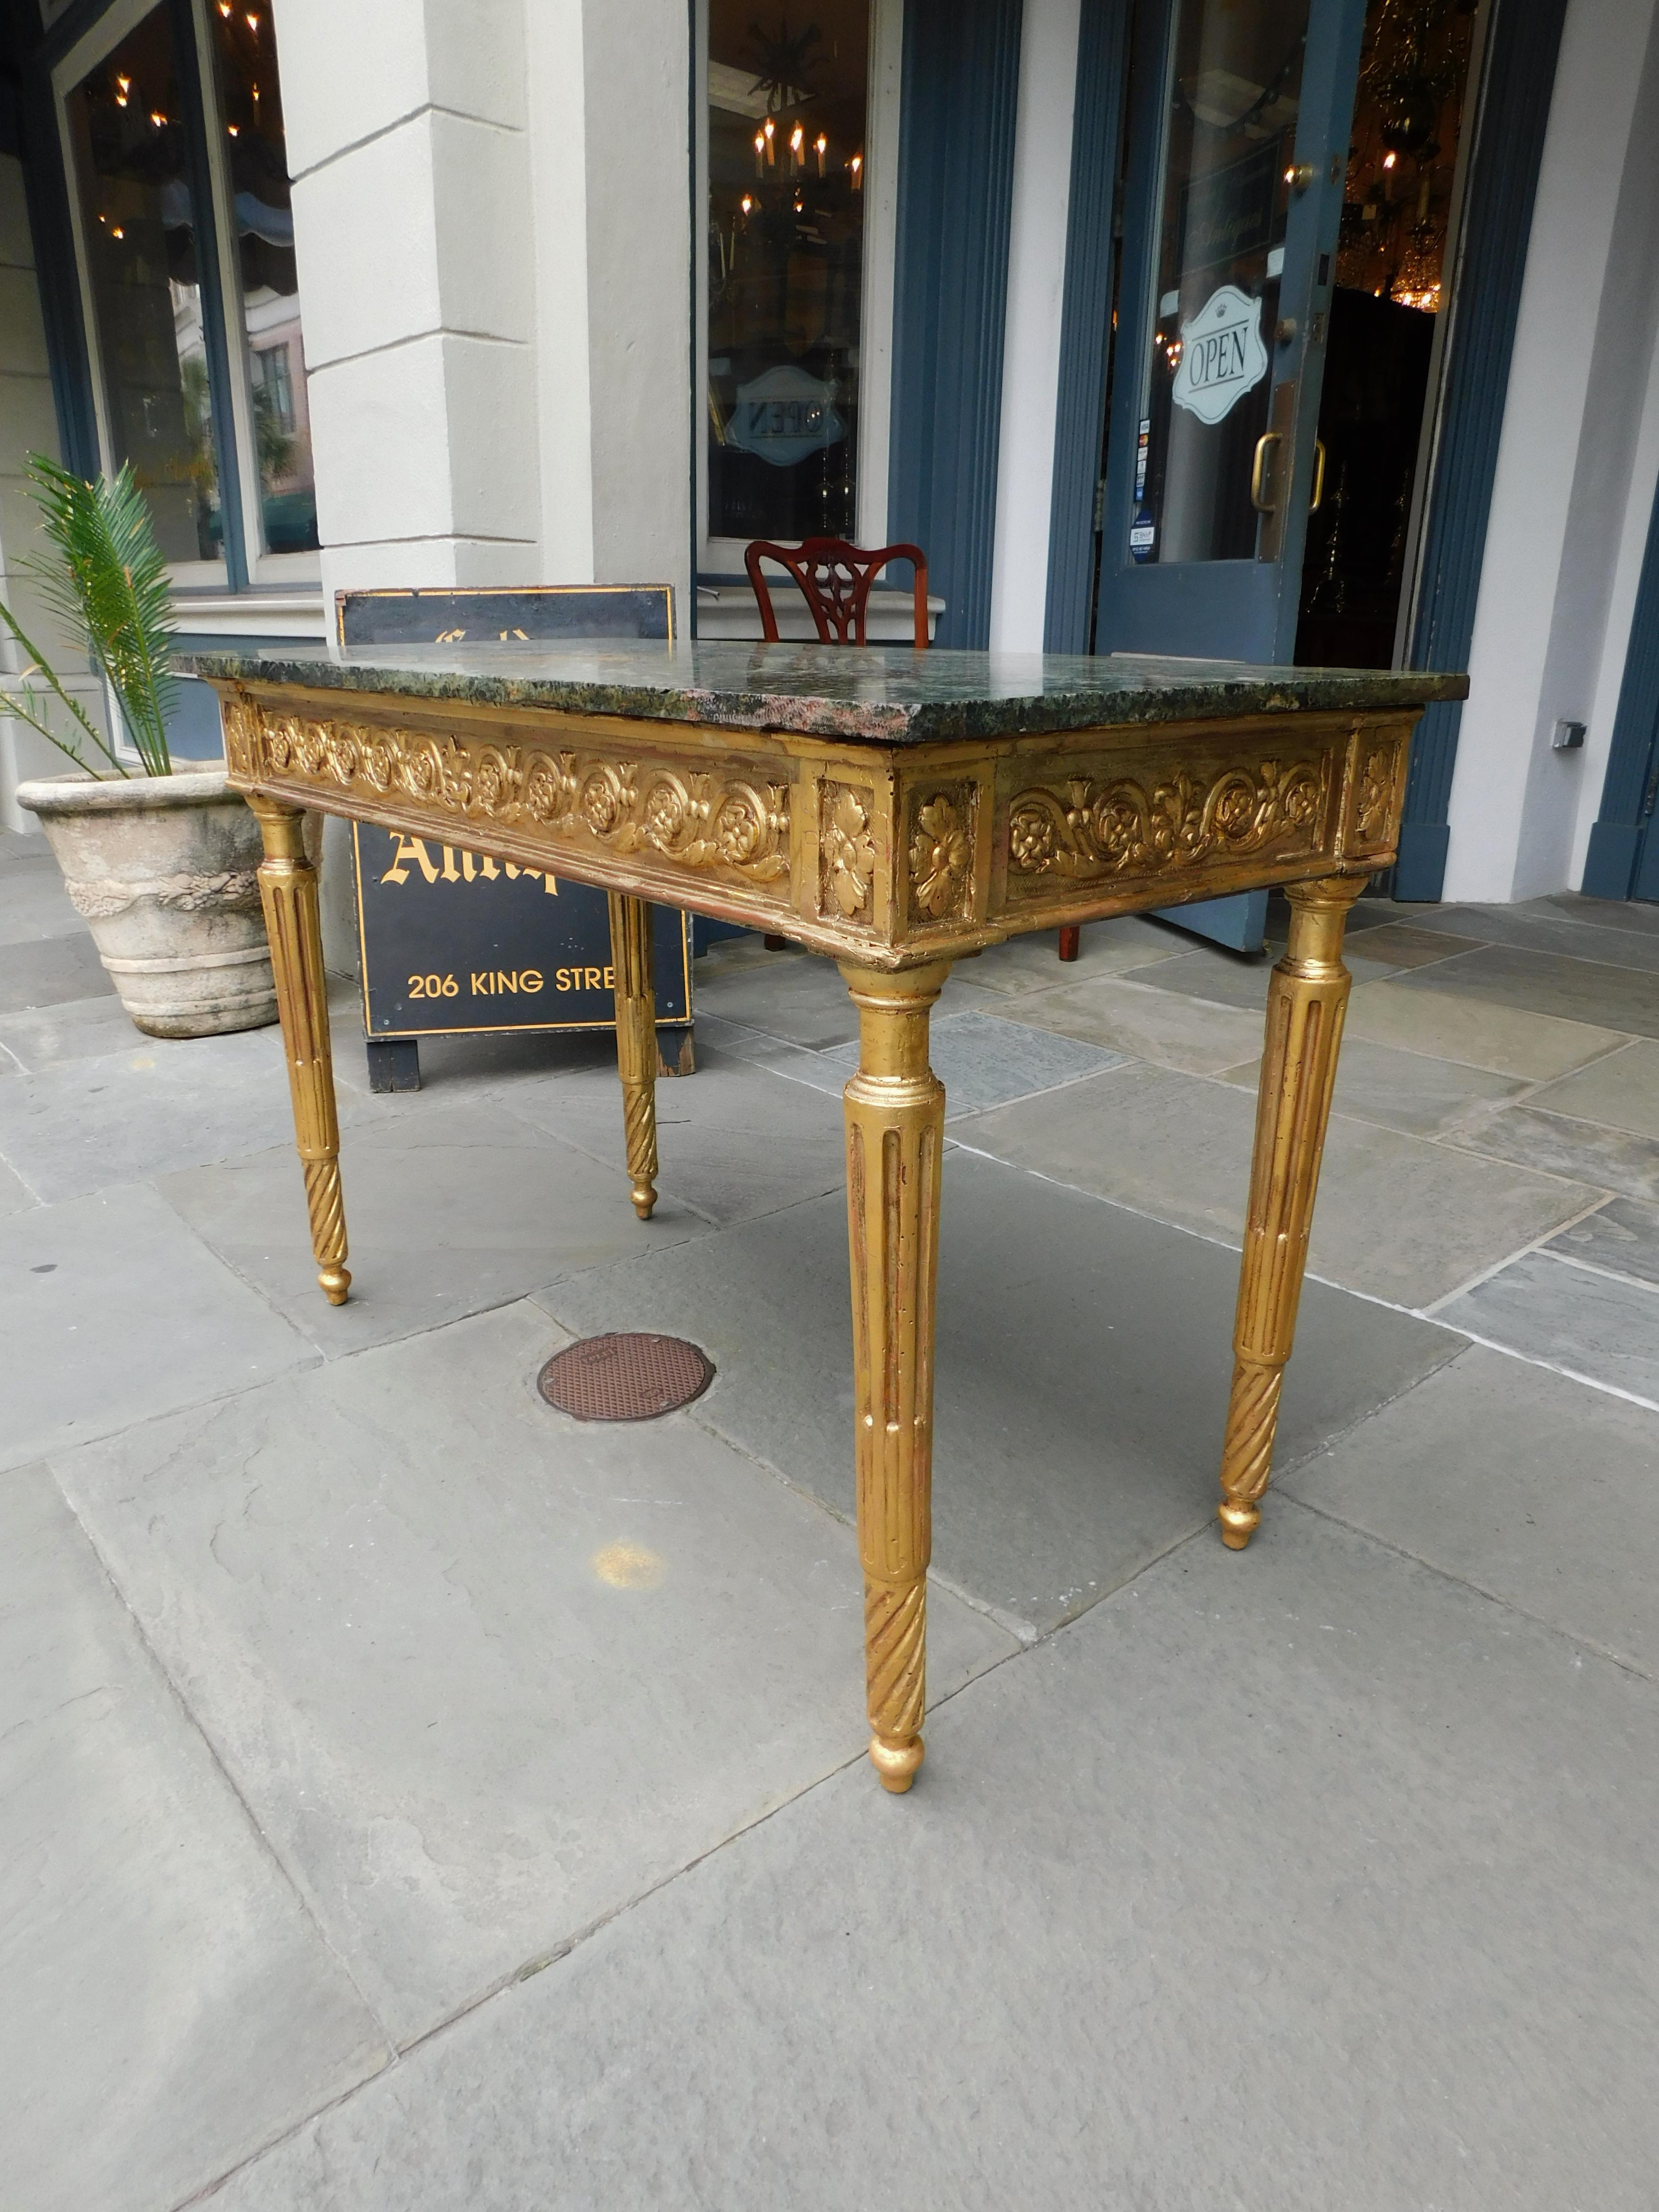 Gesso Italian Gilt Wood Marble Top Foliage Console Table with Fluted Legs, Circa 1770 For Sale